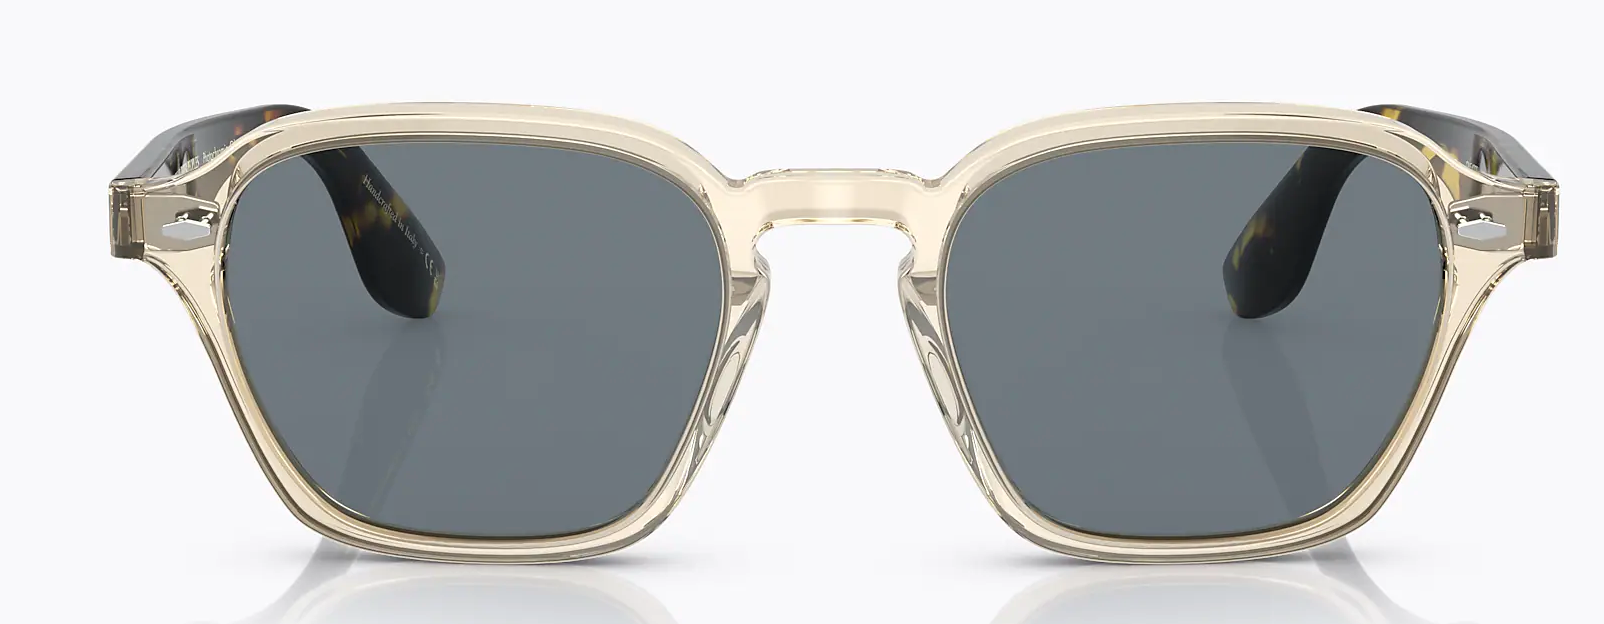 Brunello Cucinelli x Oliver Peoples Griffo